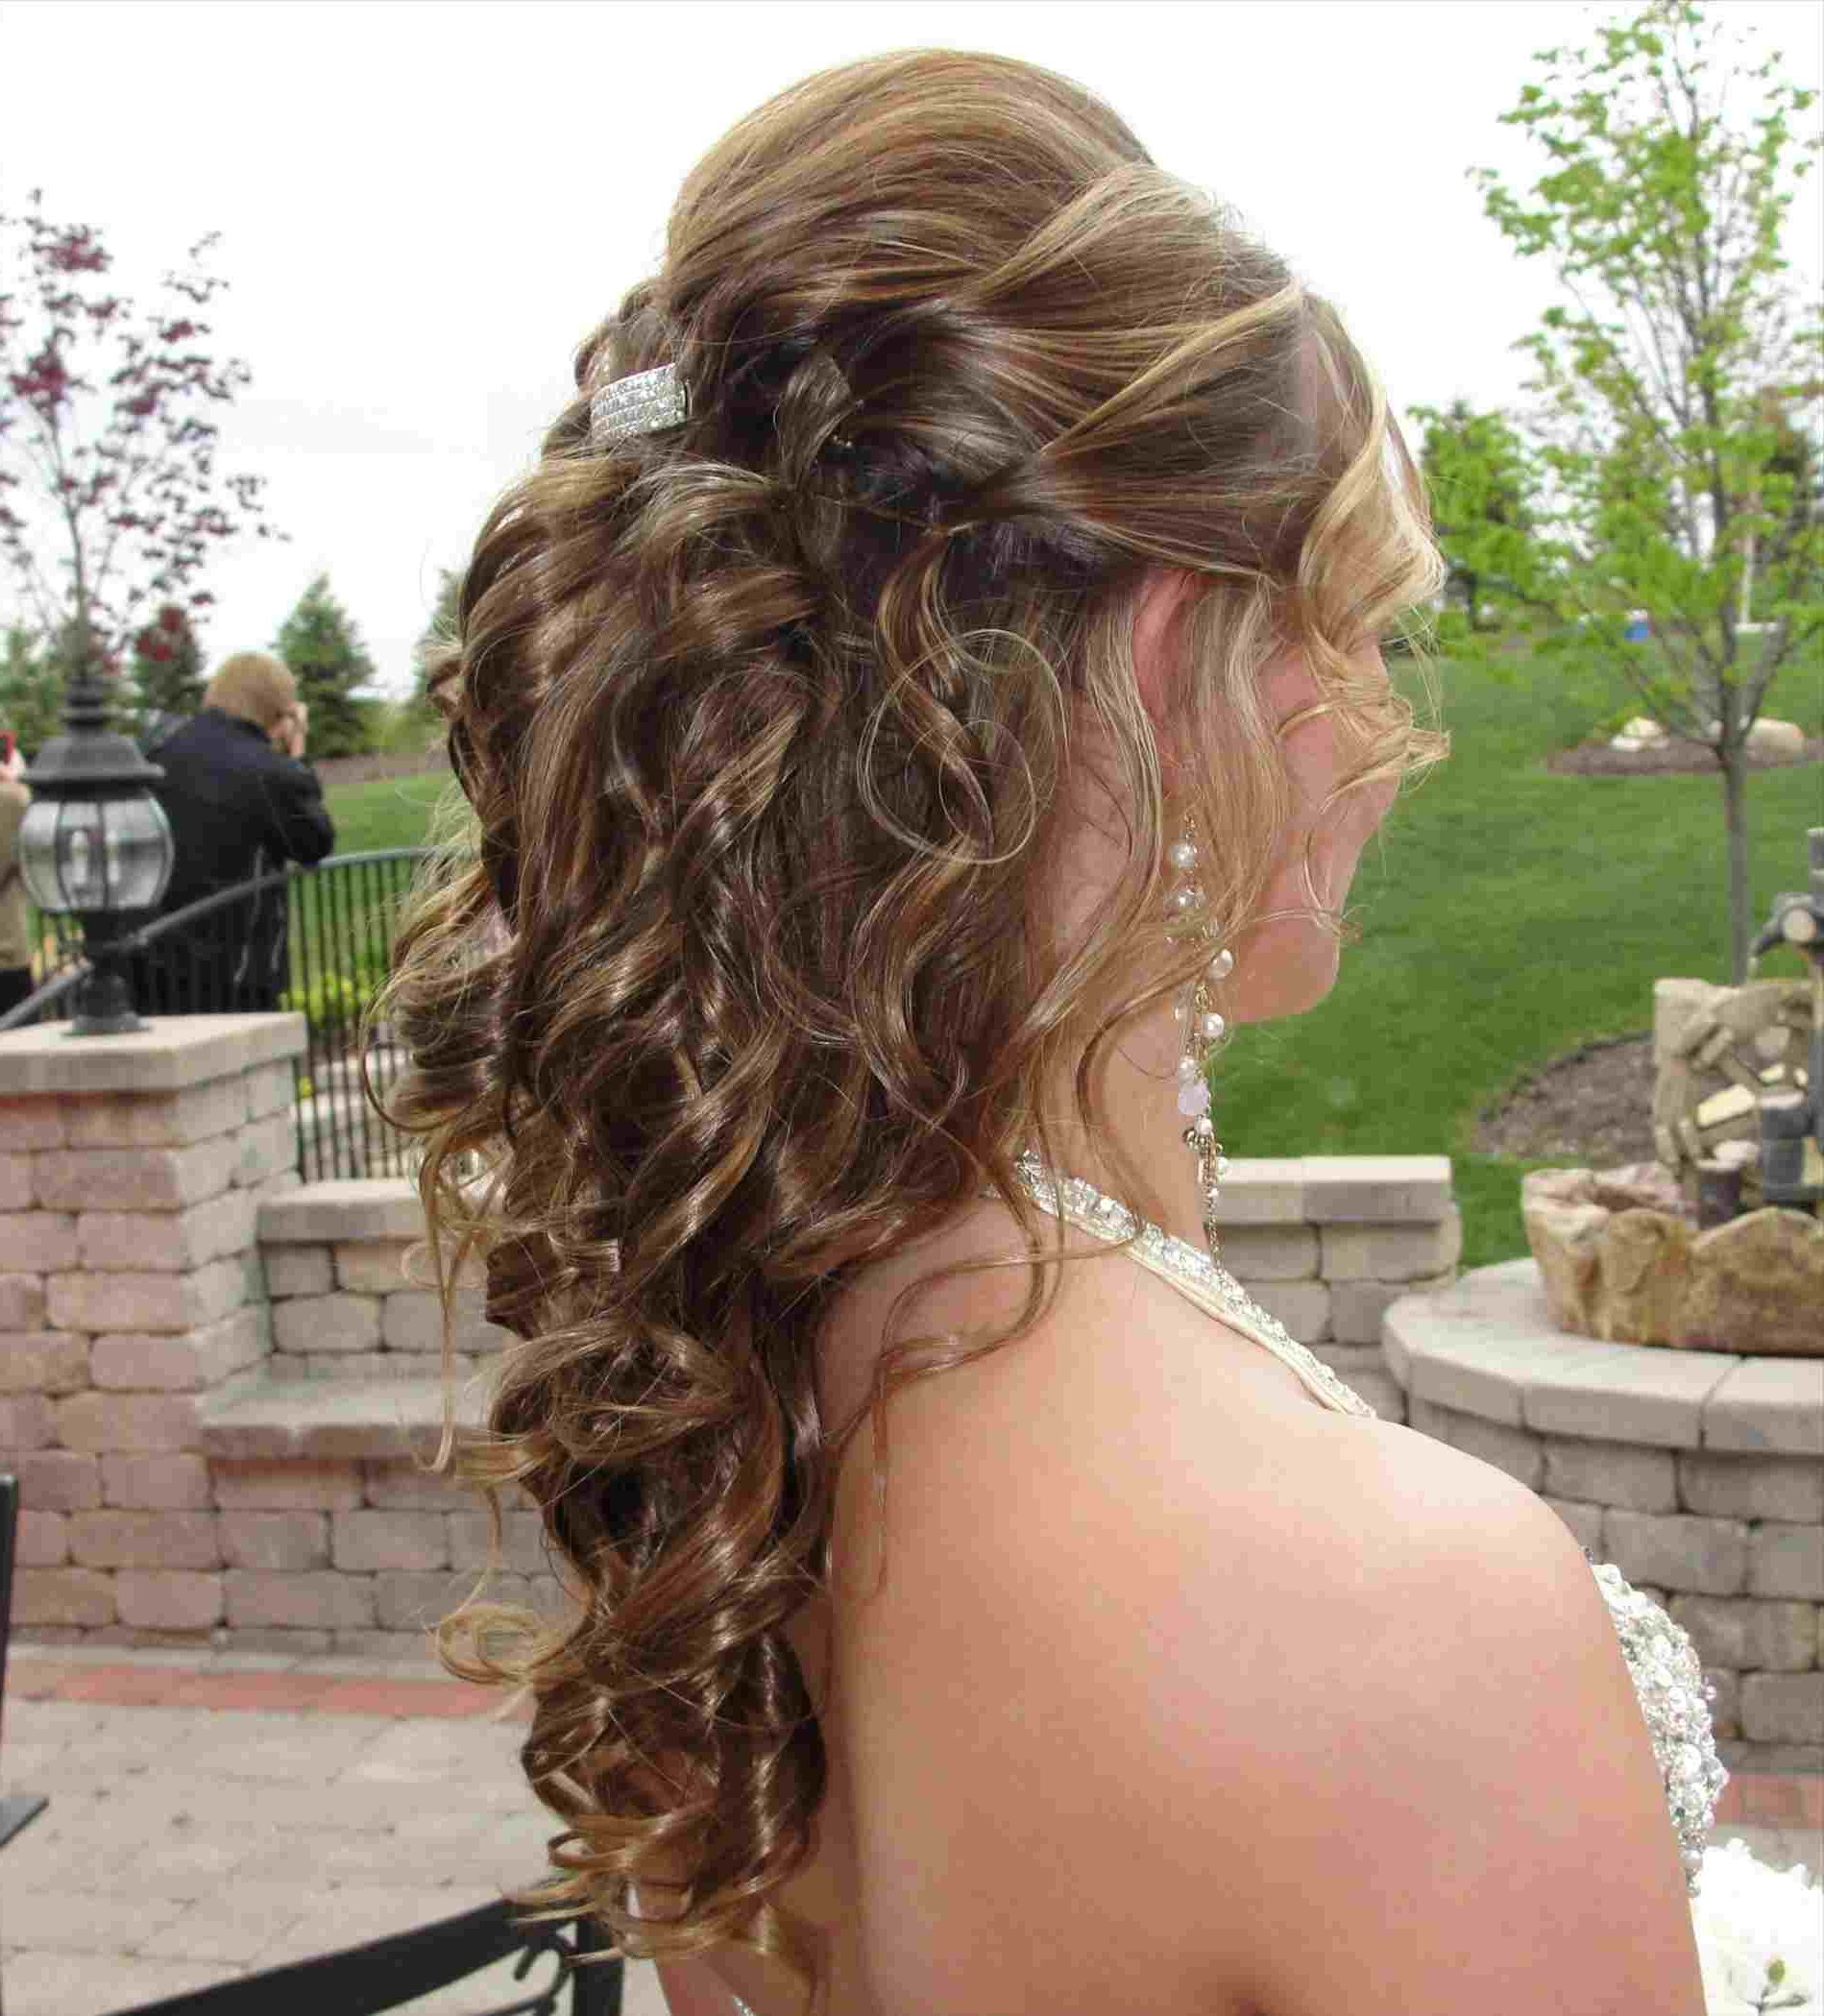 2018 Curly Prom Prom Hairstyles In Hairstyles : Prom Hairstyles For Long Hair Half Up Down Curly E (View 13 of 20)